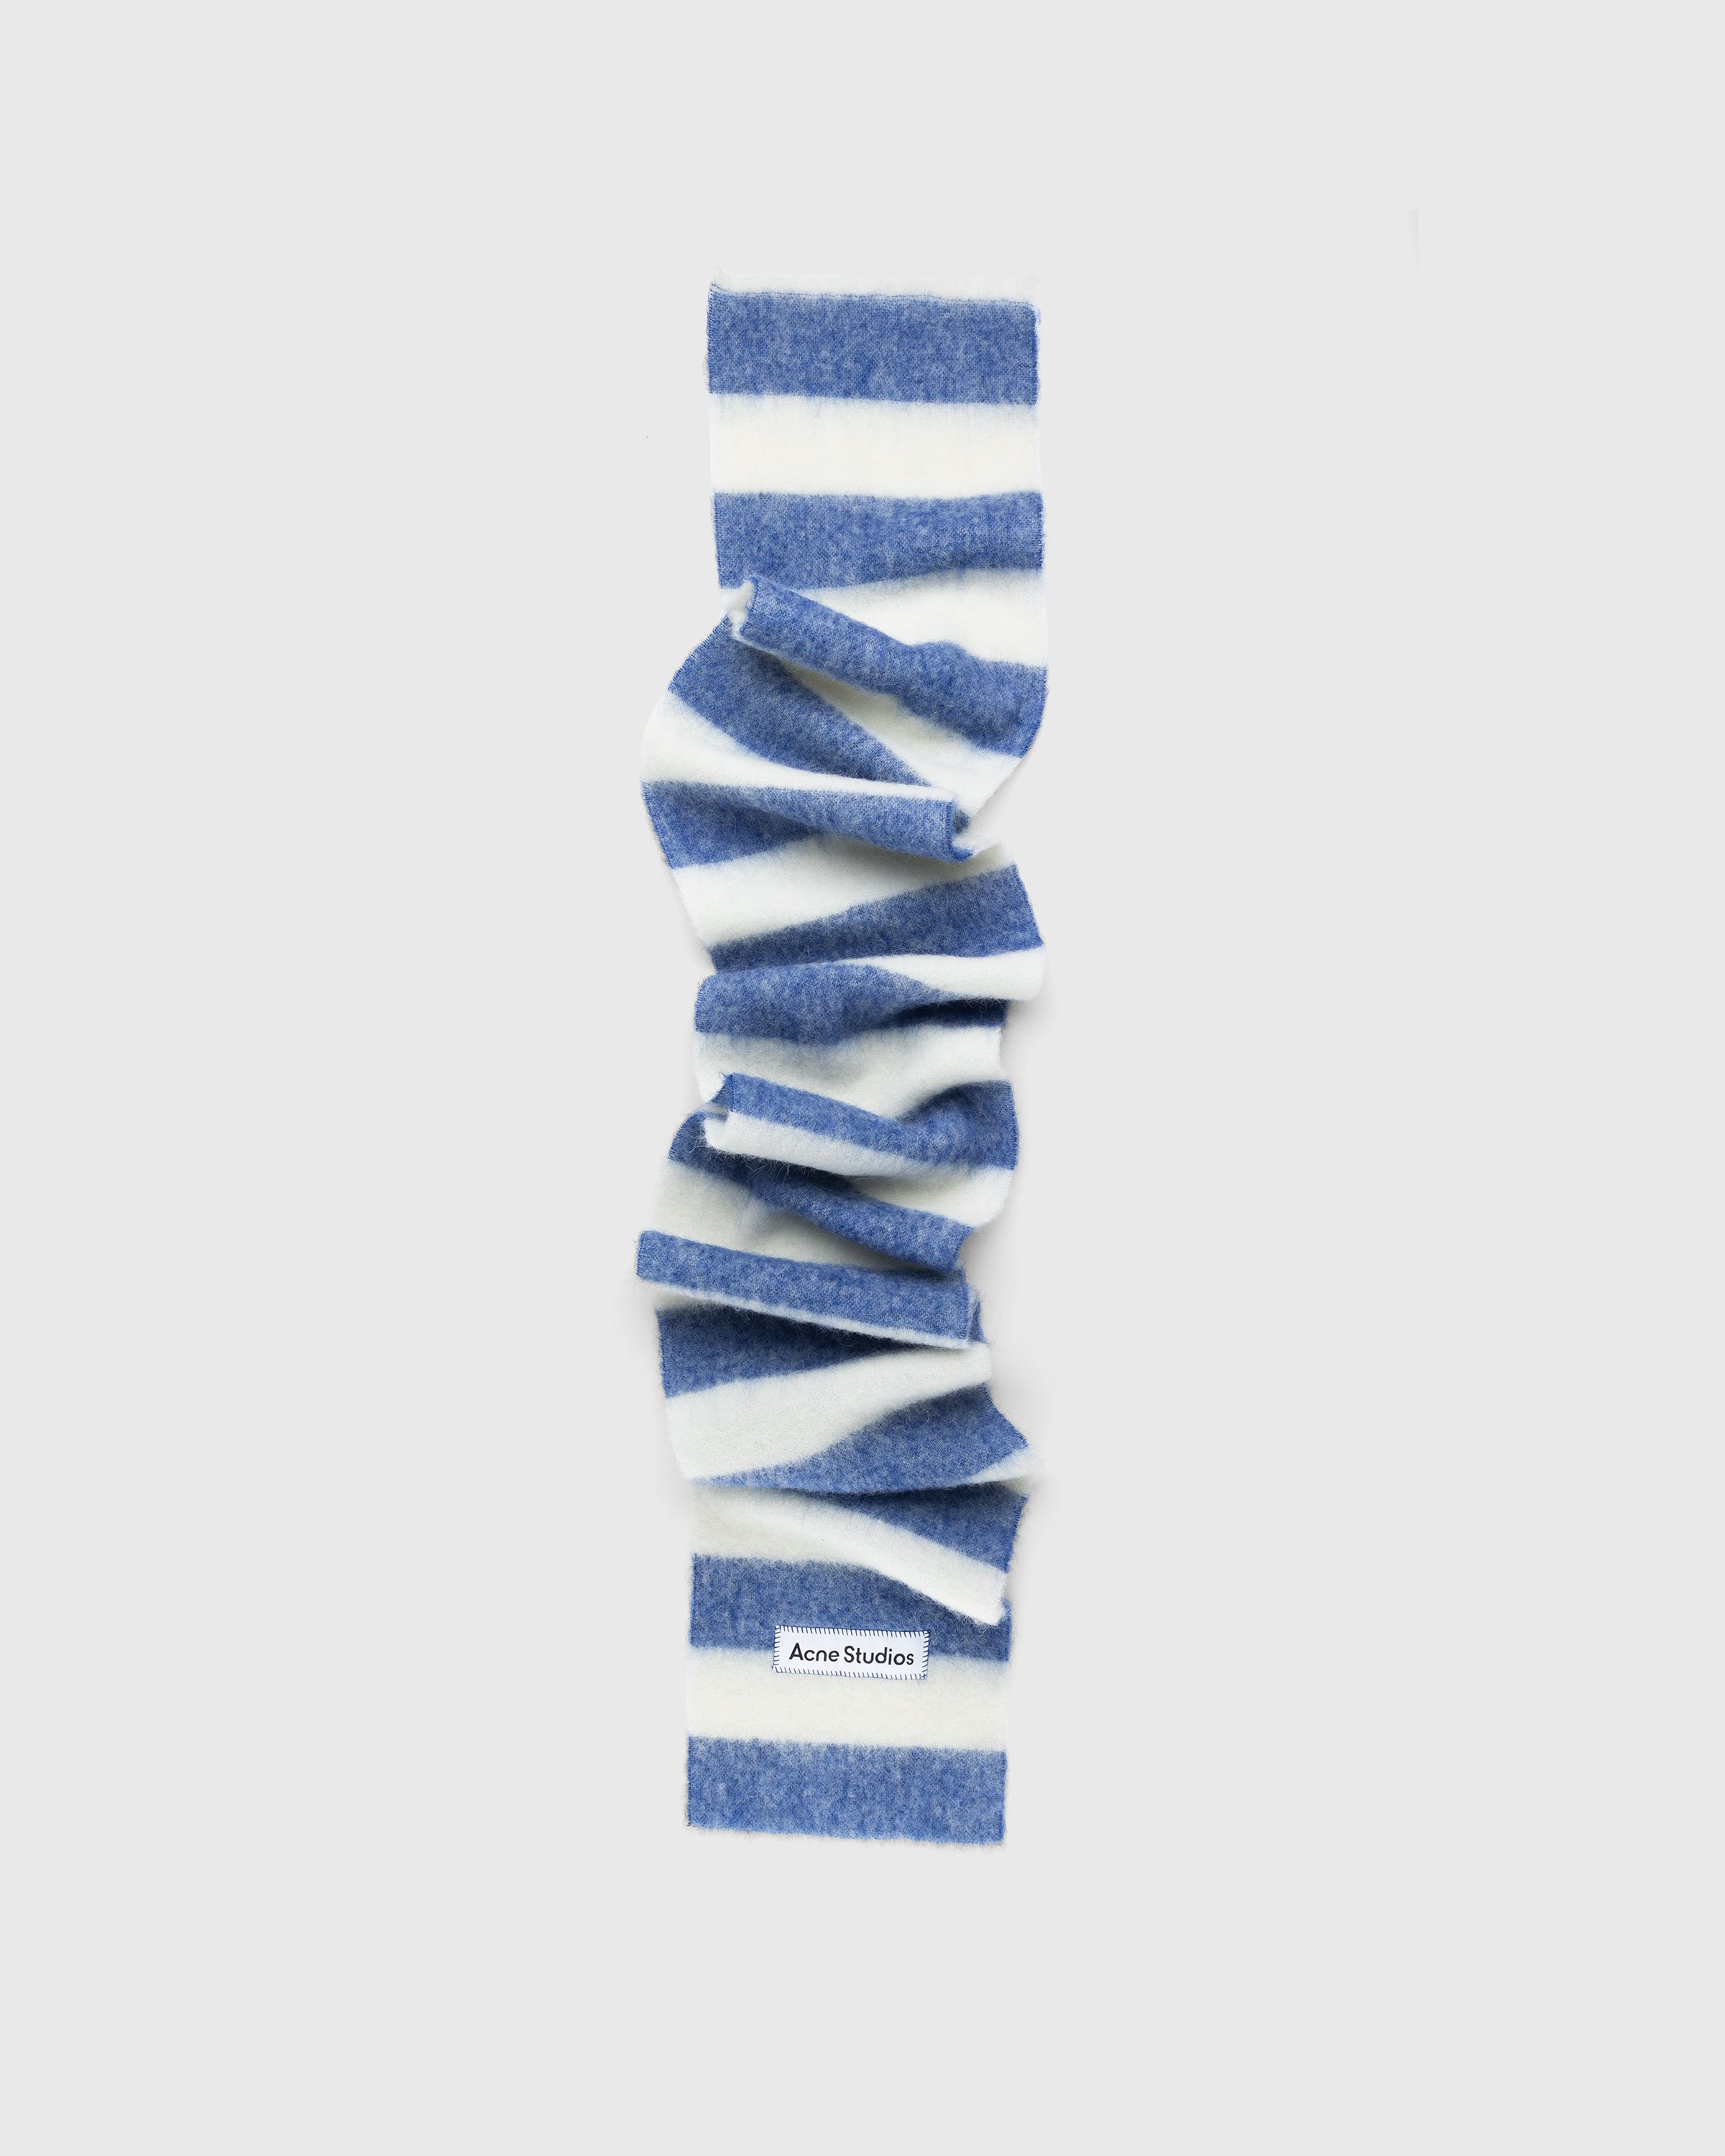 Acne Studios - Striped Wool Blend Scarf Blue/White - Accessories - Blue - Image 1